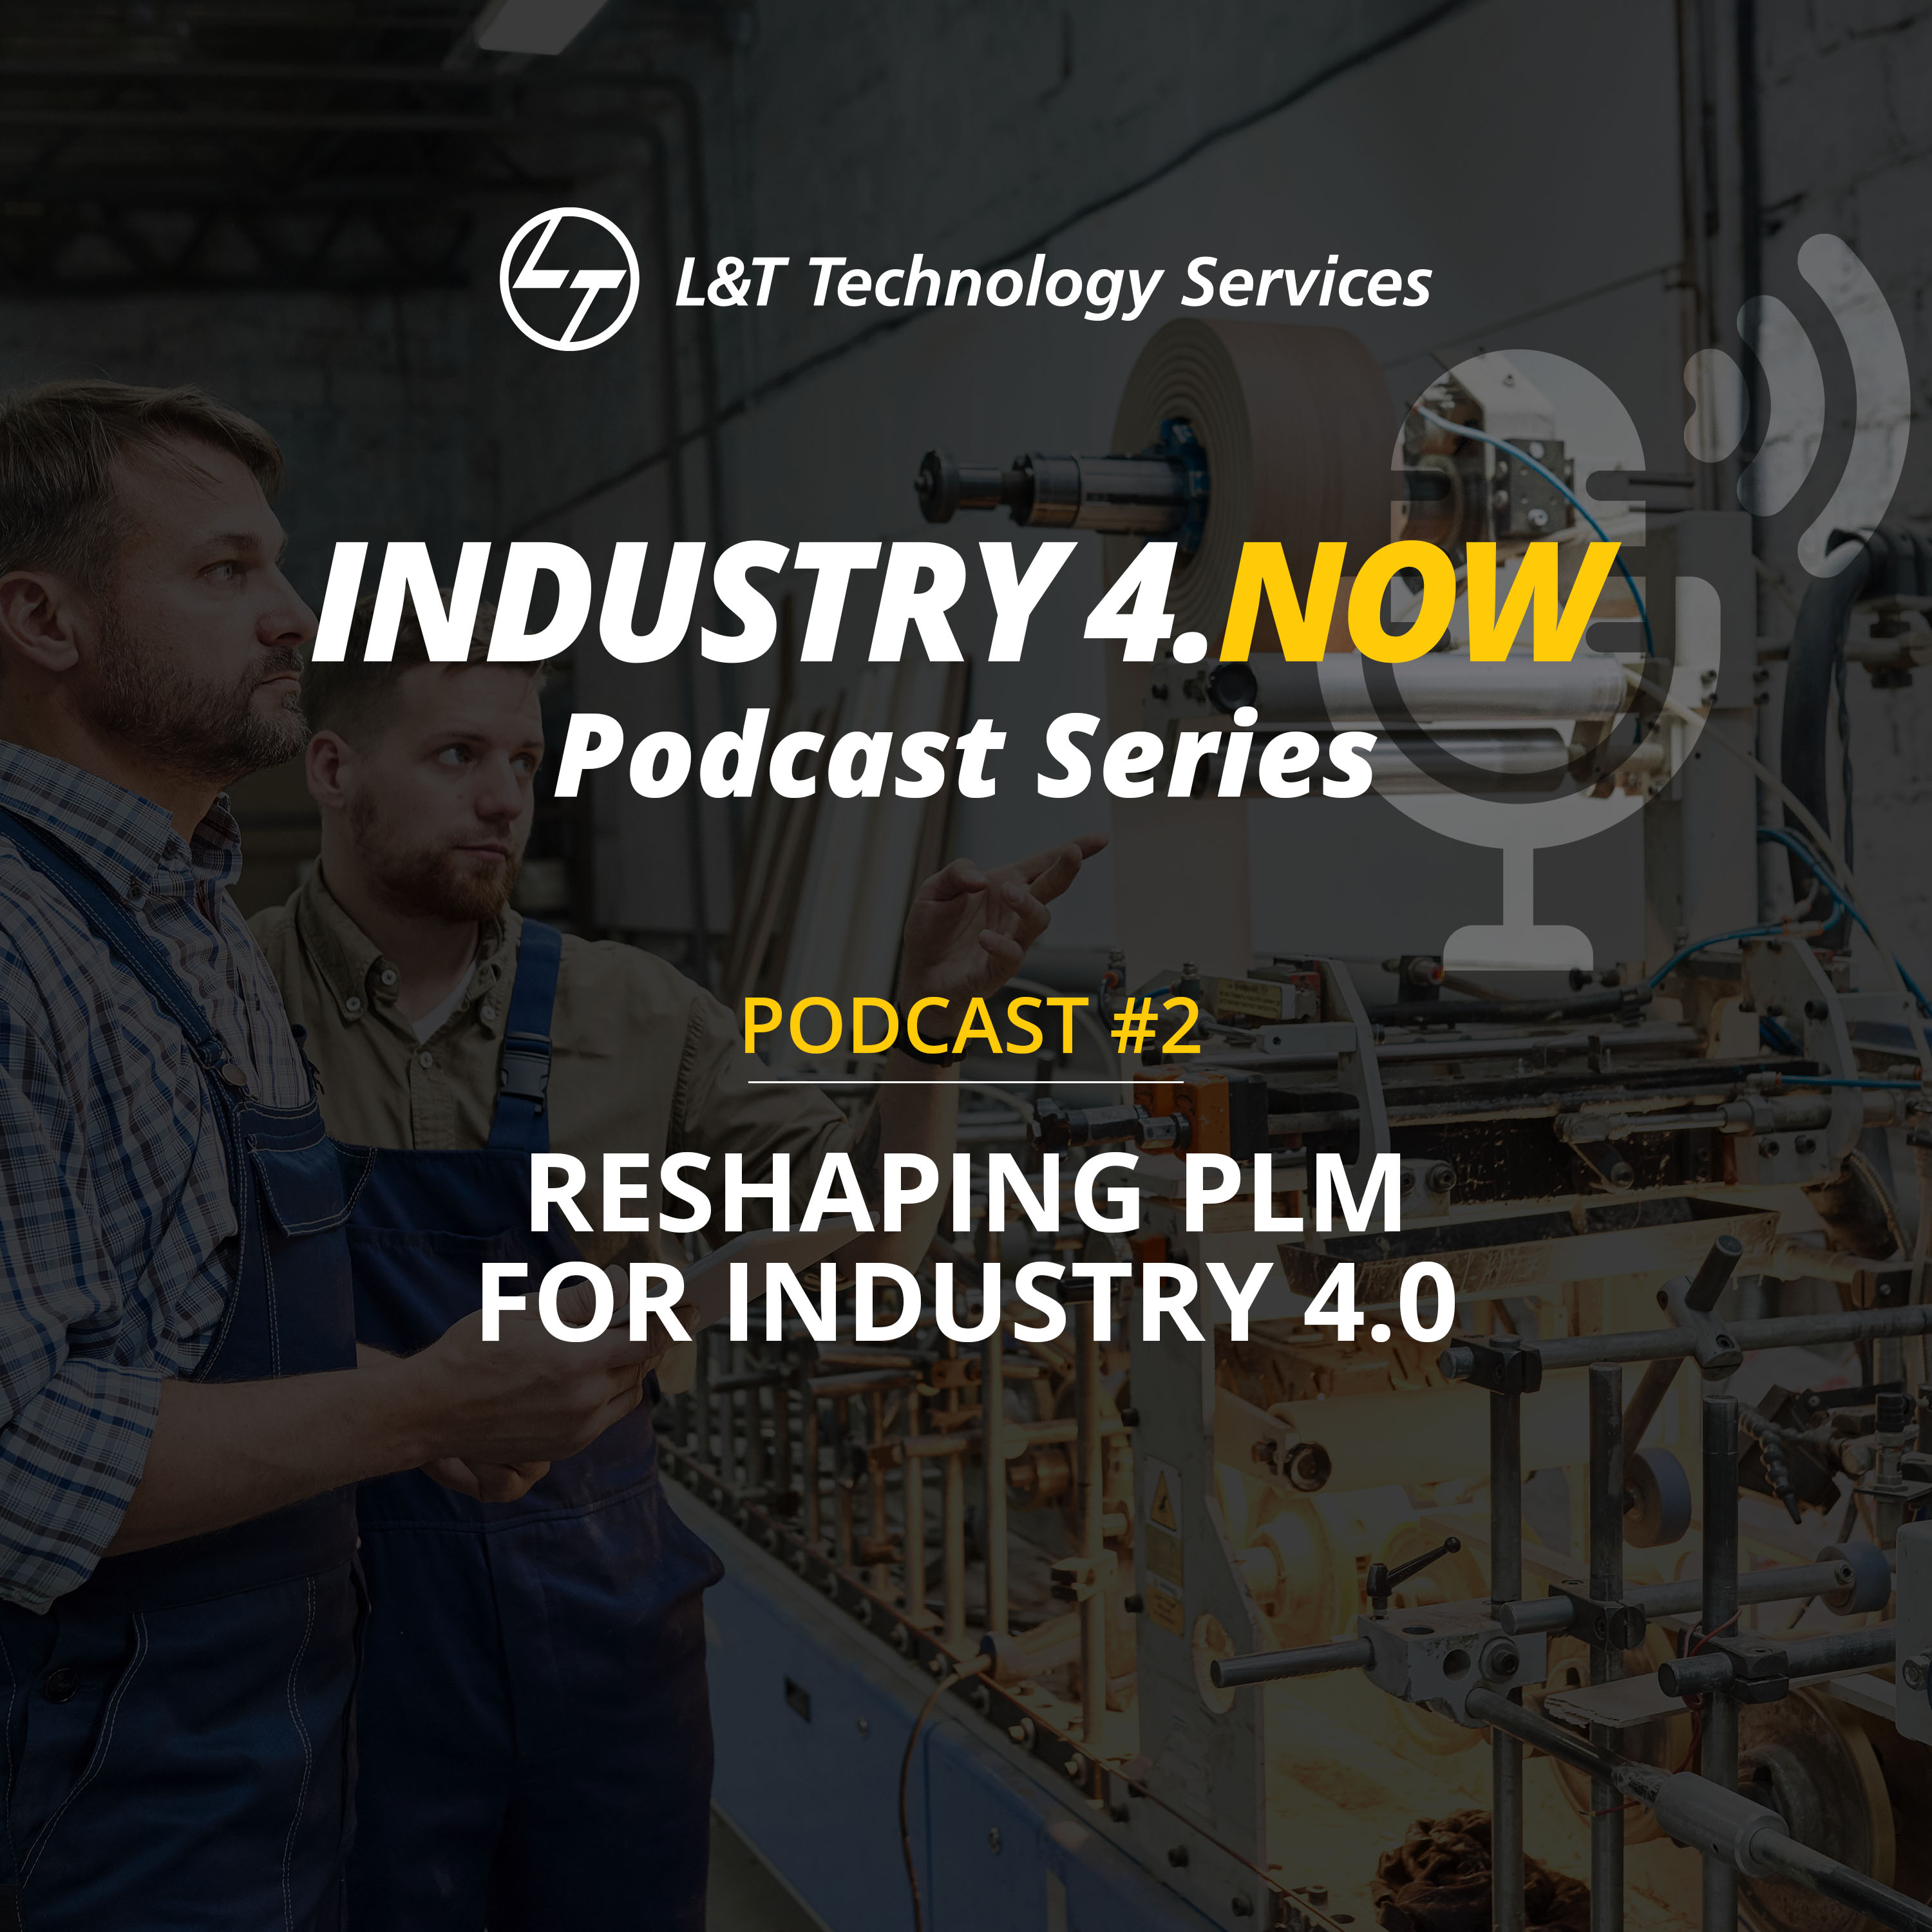 PLM for Industry 4.0